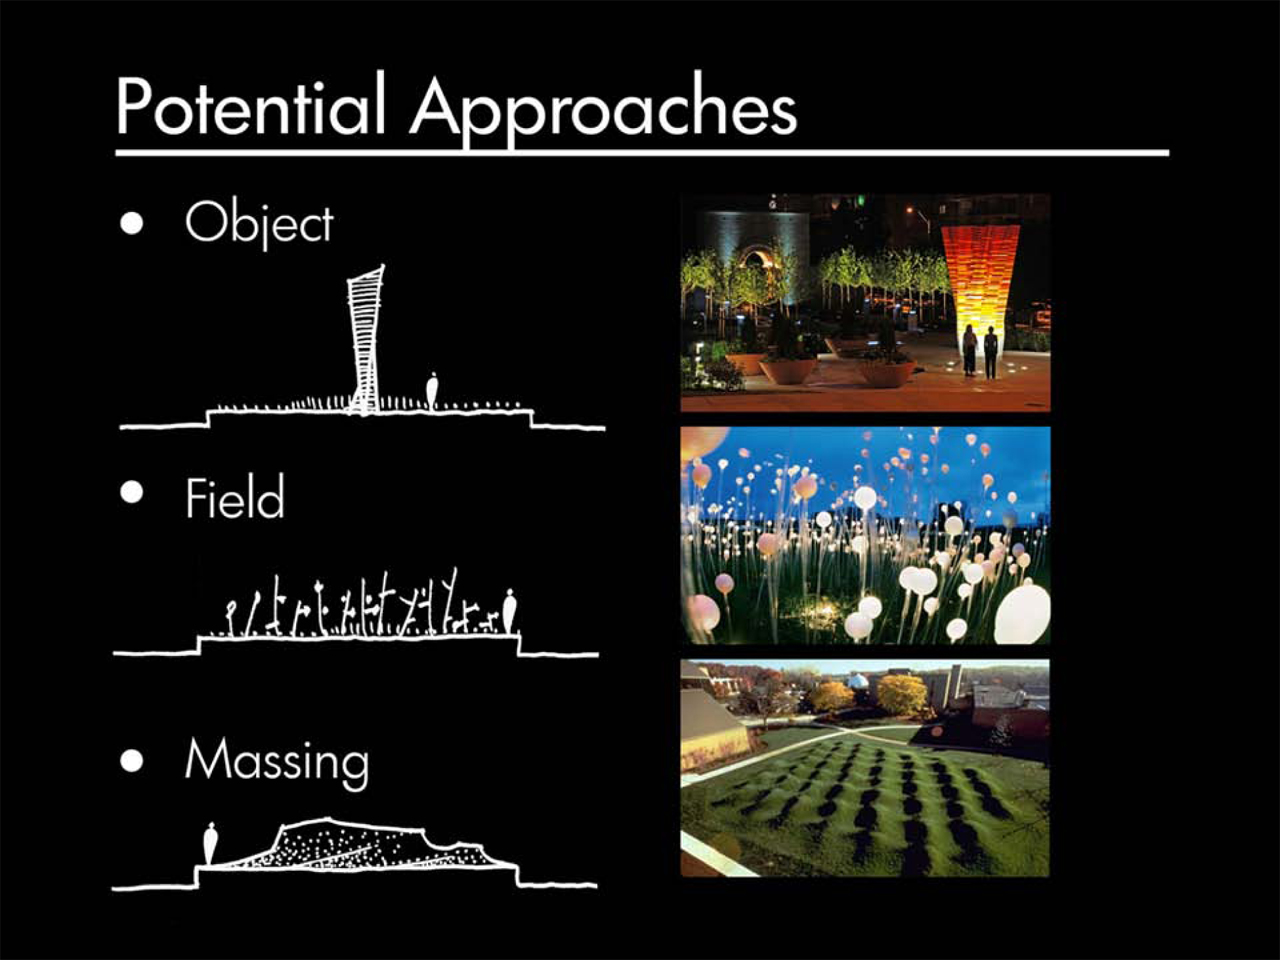 potential approaches to object field and massing infographic